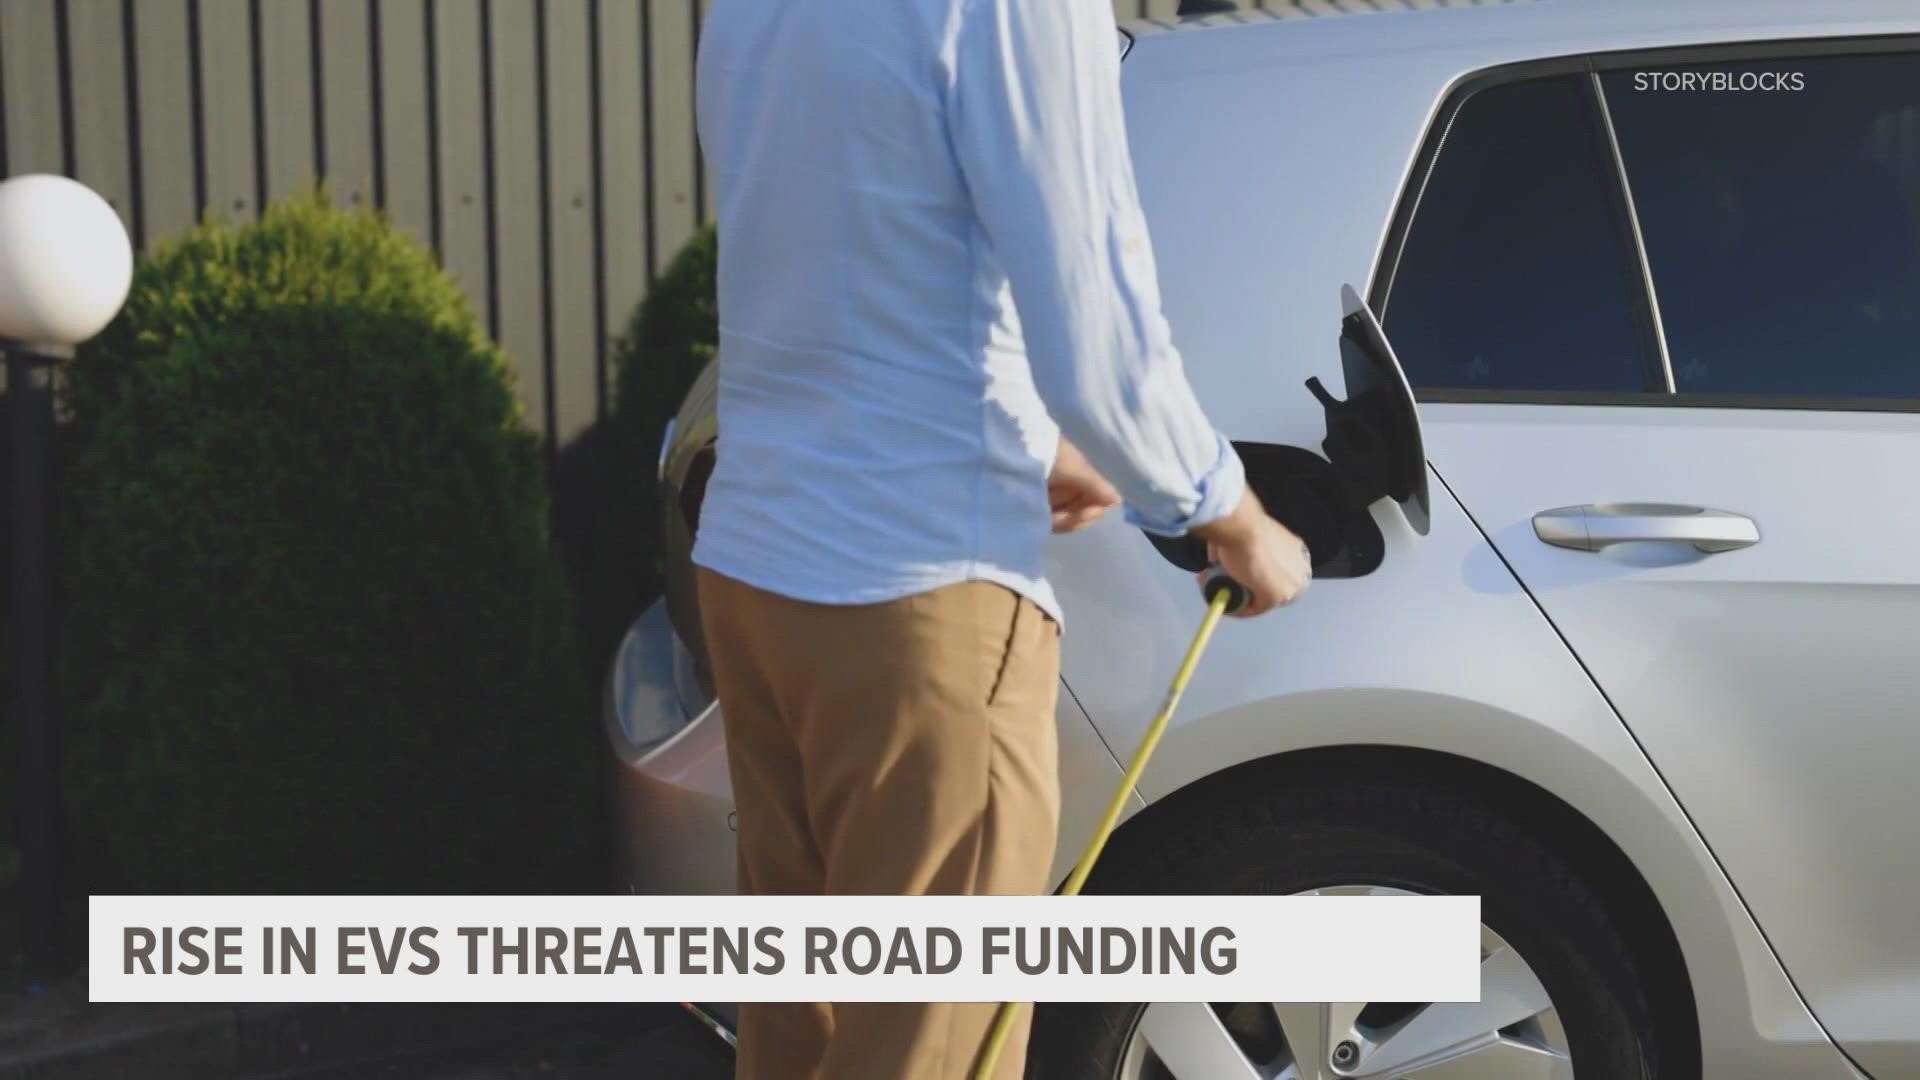 A rise in EVs is raising concerns about long-term funding for our roads.